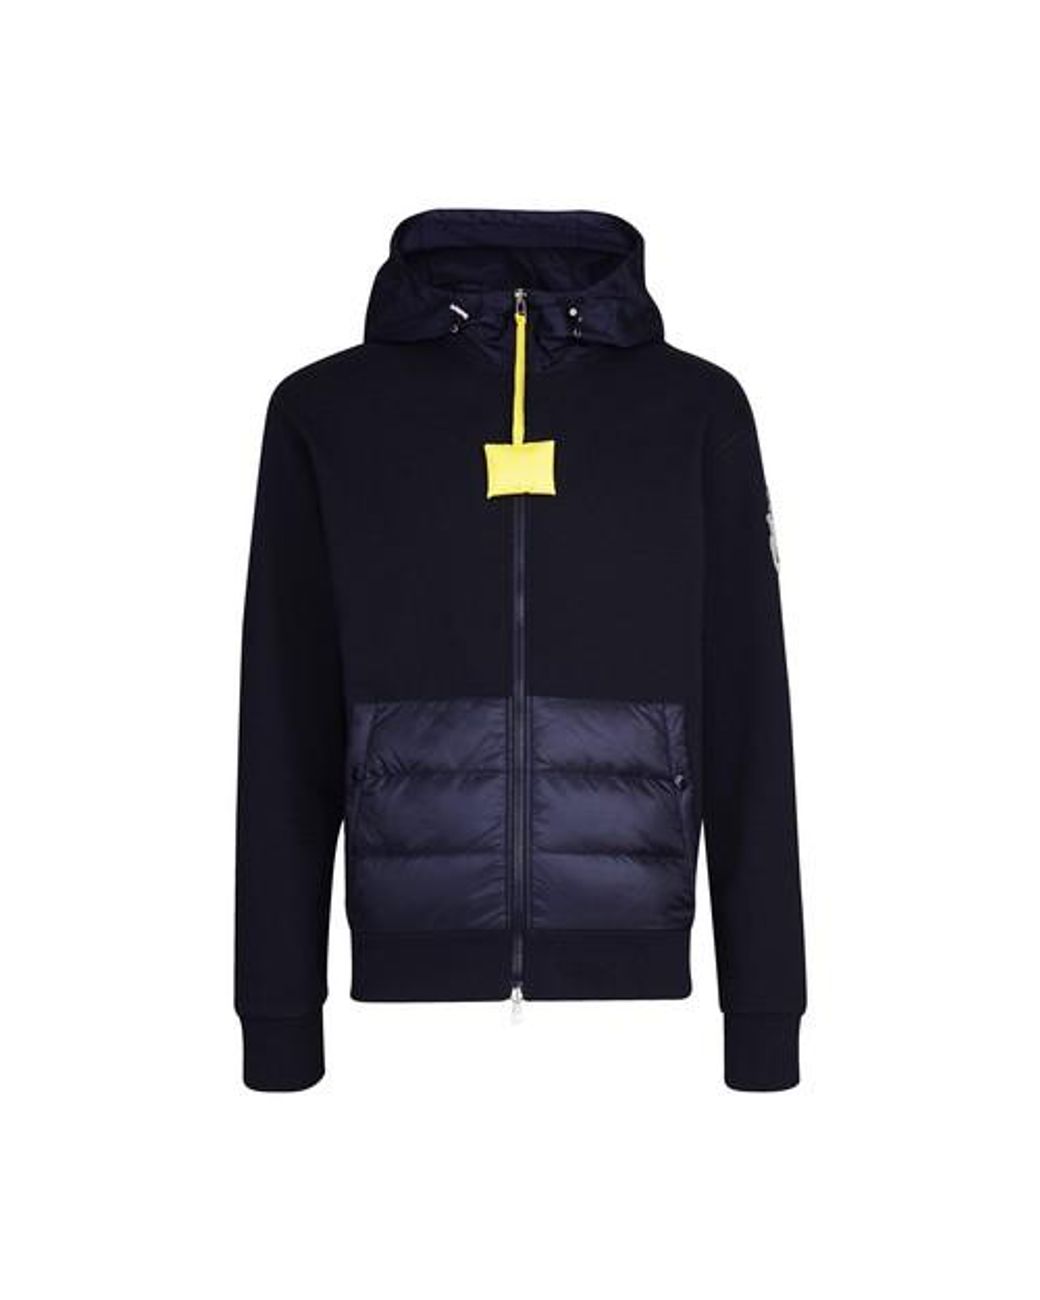 Moncler Genius X Jw Anderson - Cardigan in Navy (Blue) for Men | Lyst